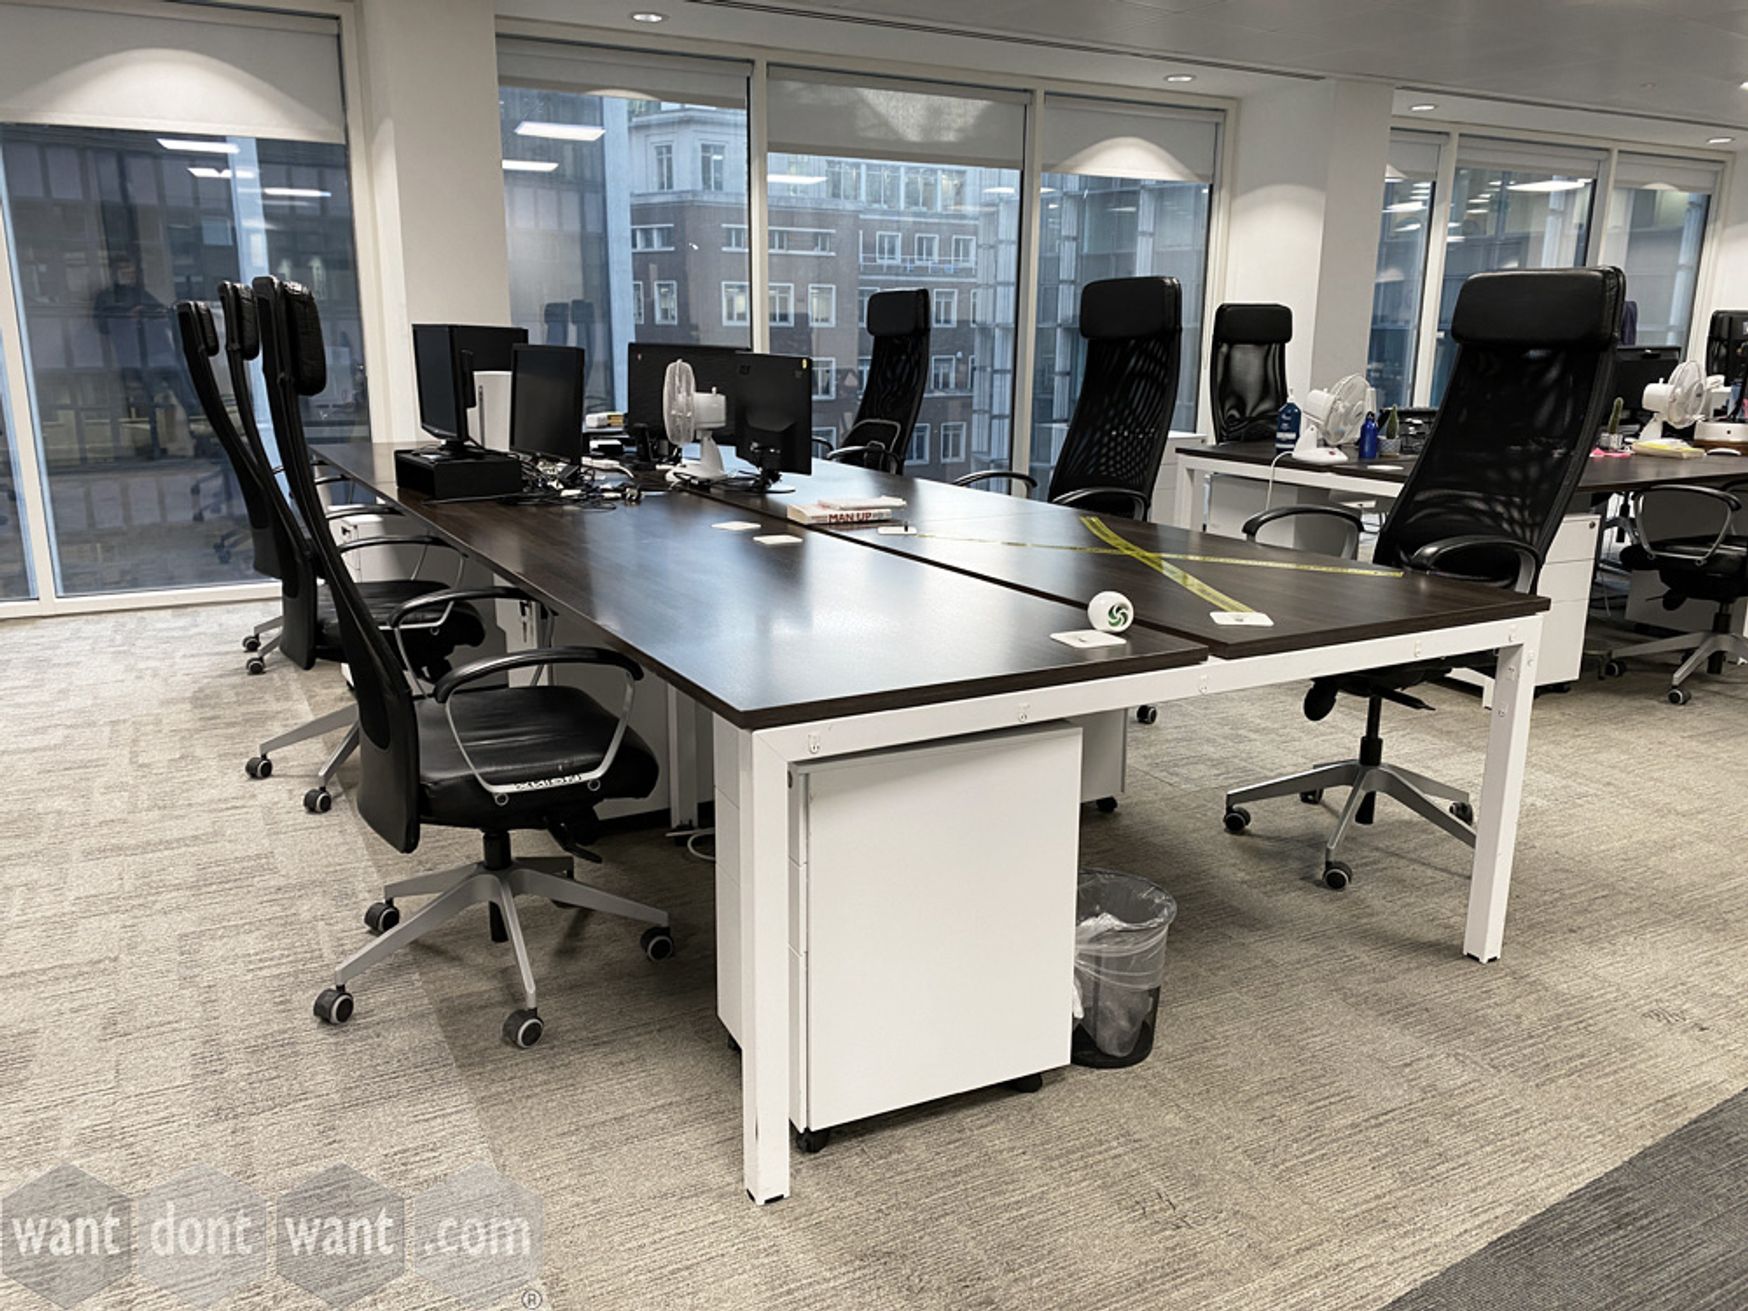 Used desks with walnut MFC tops and white legs in various configurations.